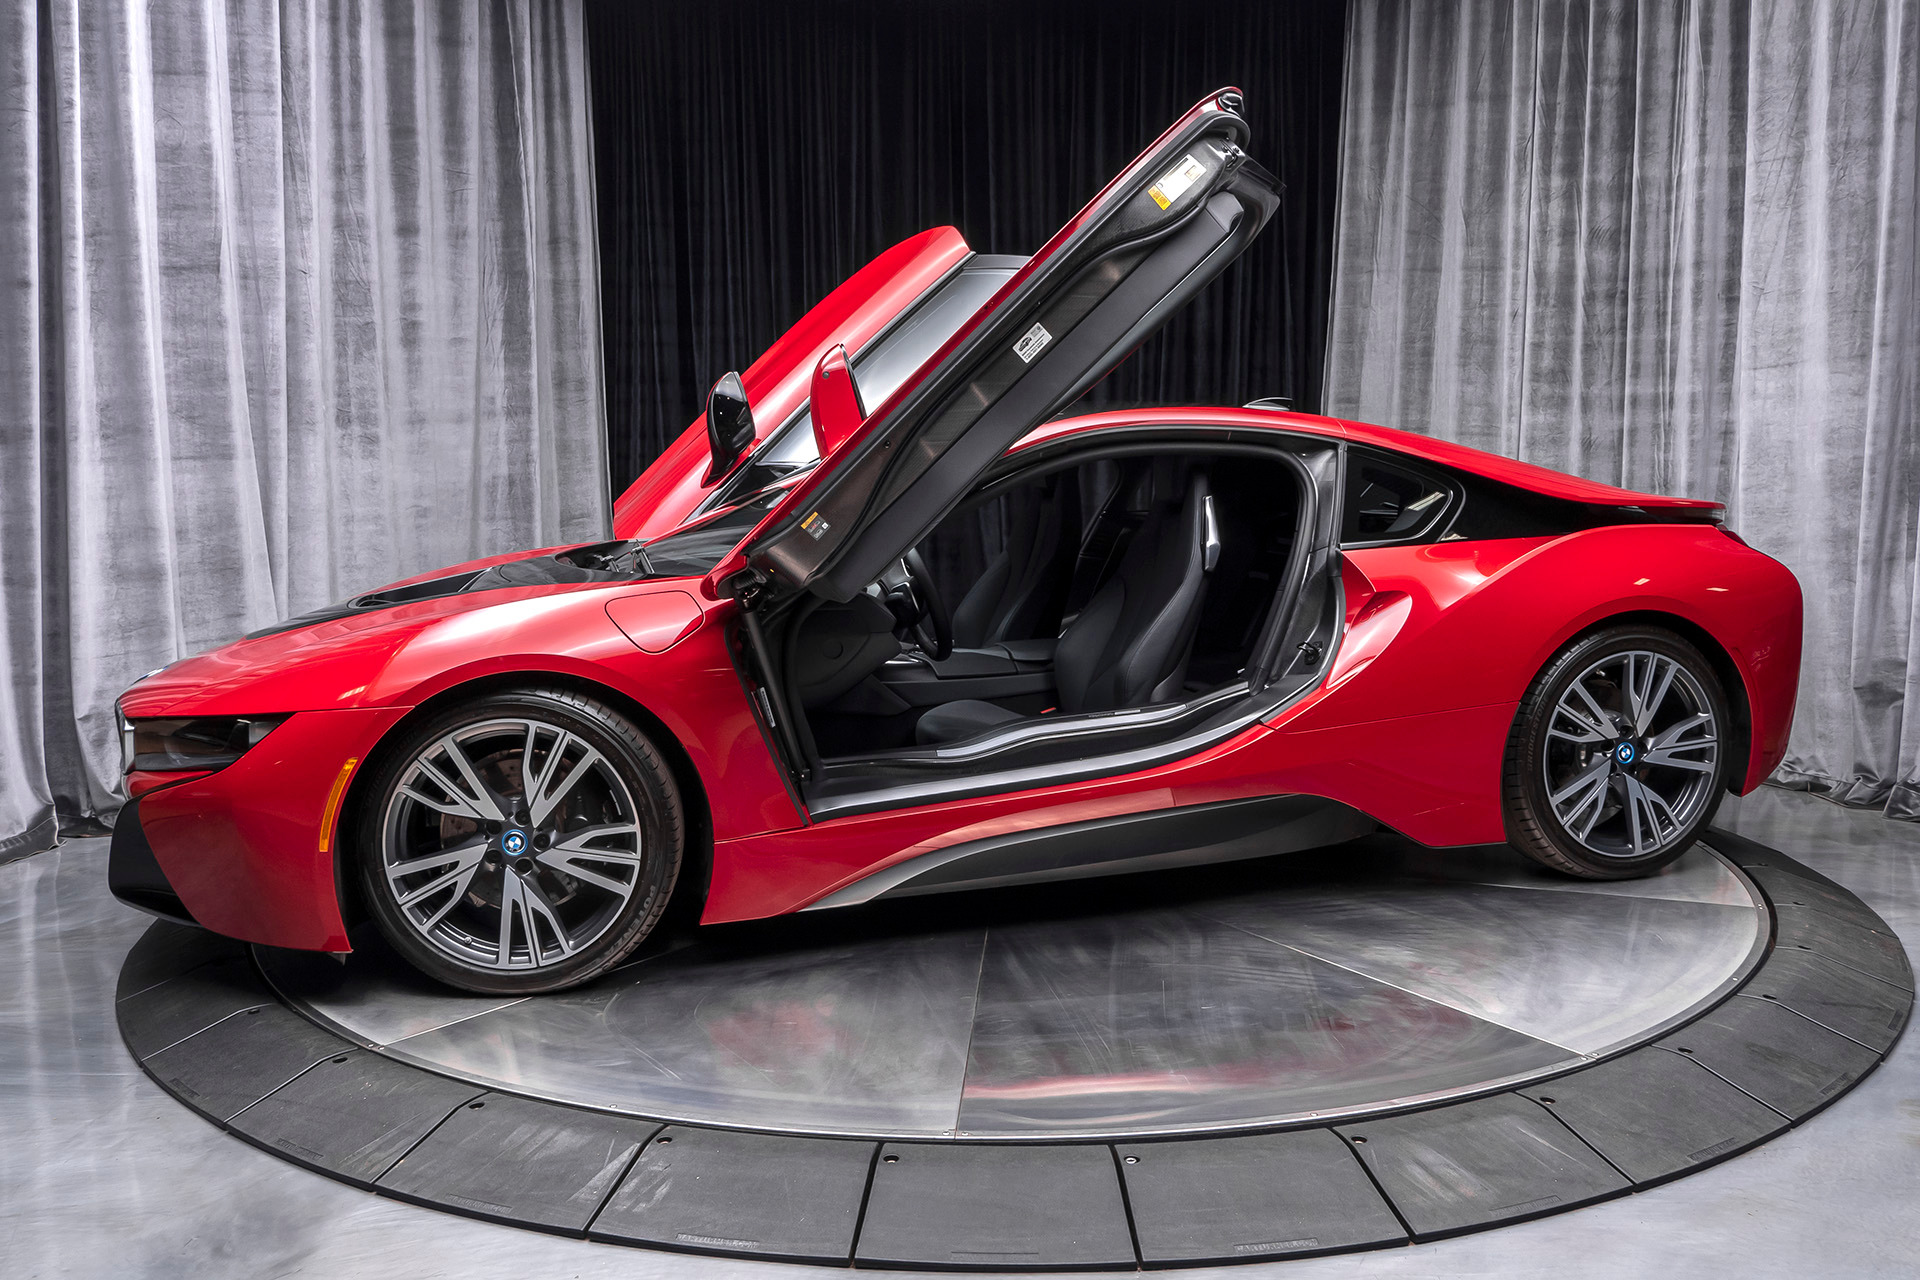 Used 2017 BMW i8 Protonic Red Edition 1 OF 100 IN THE U.S.! For Sale ($83,800) | Chicago Motor Cars Stock